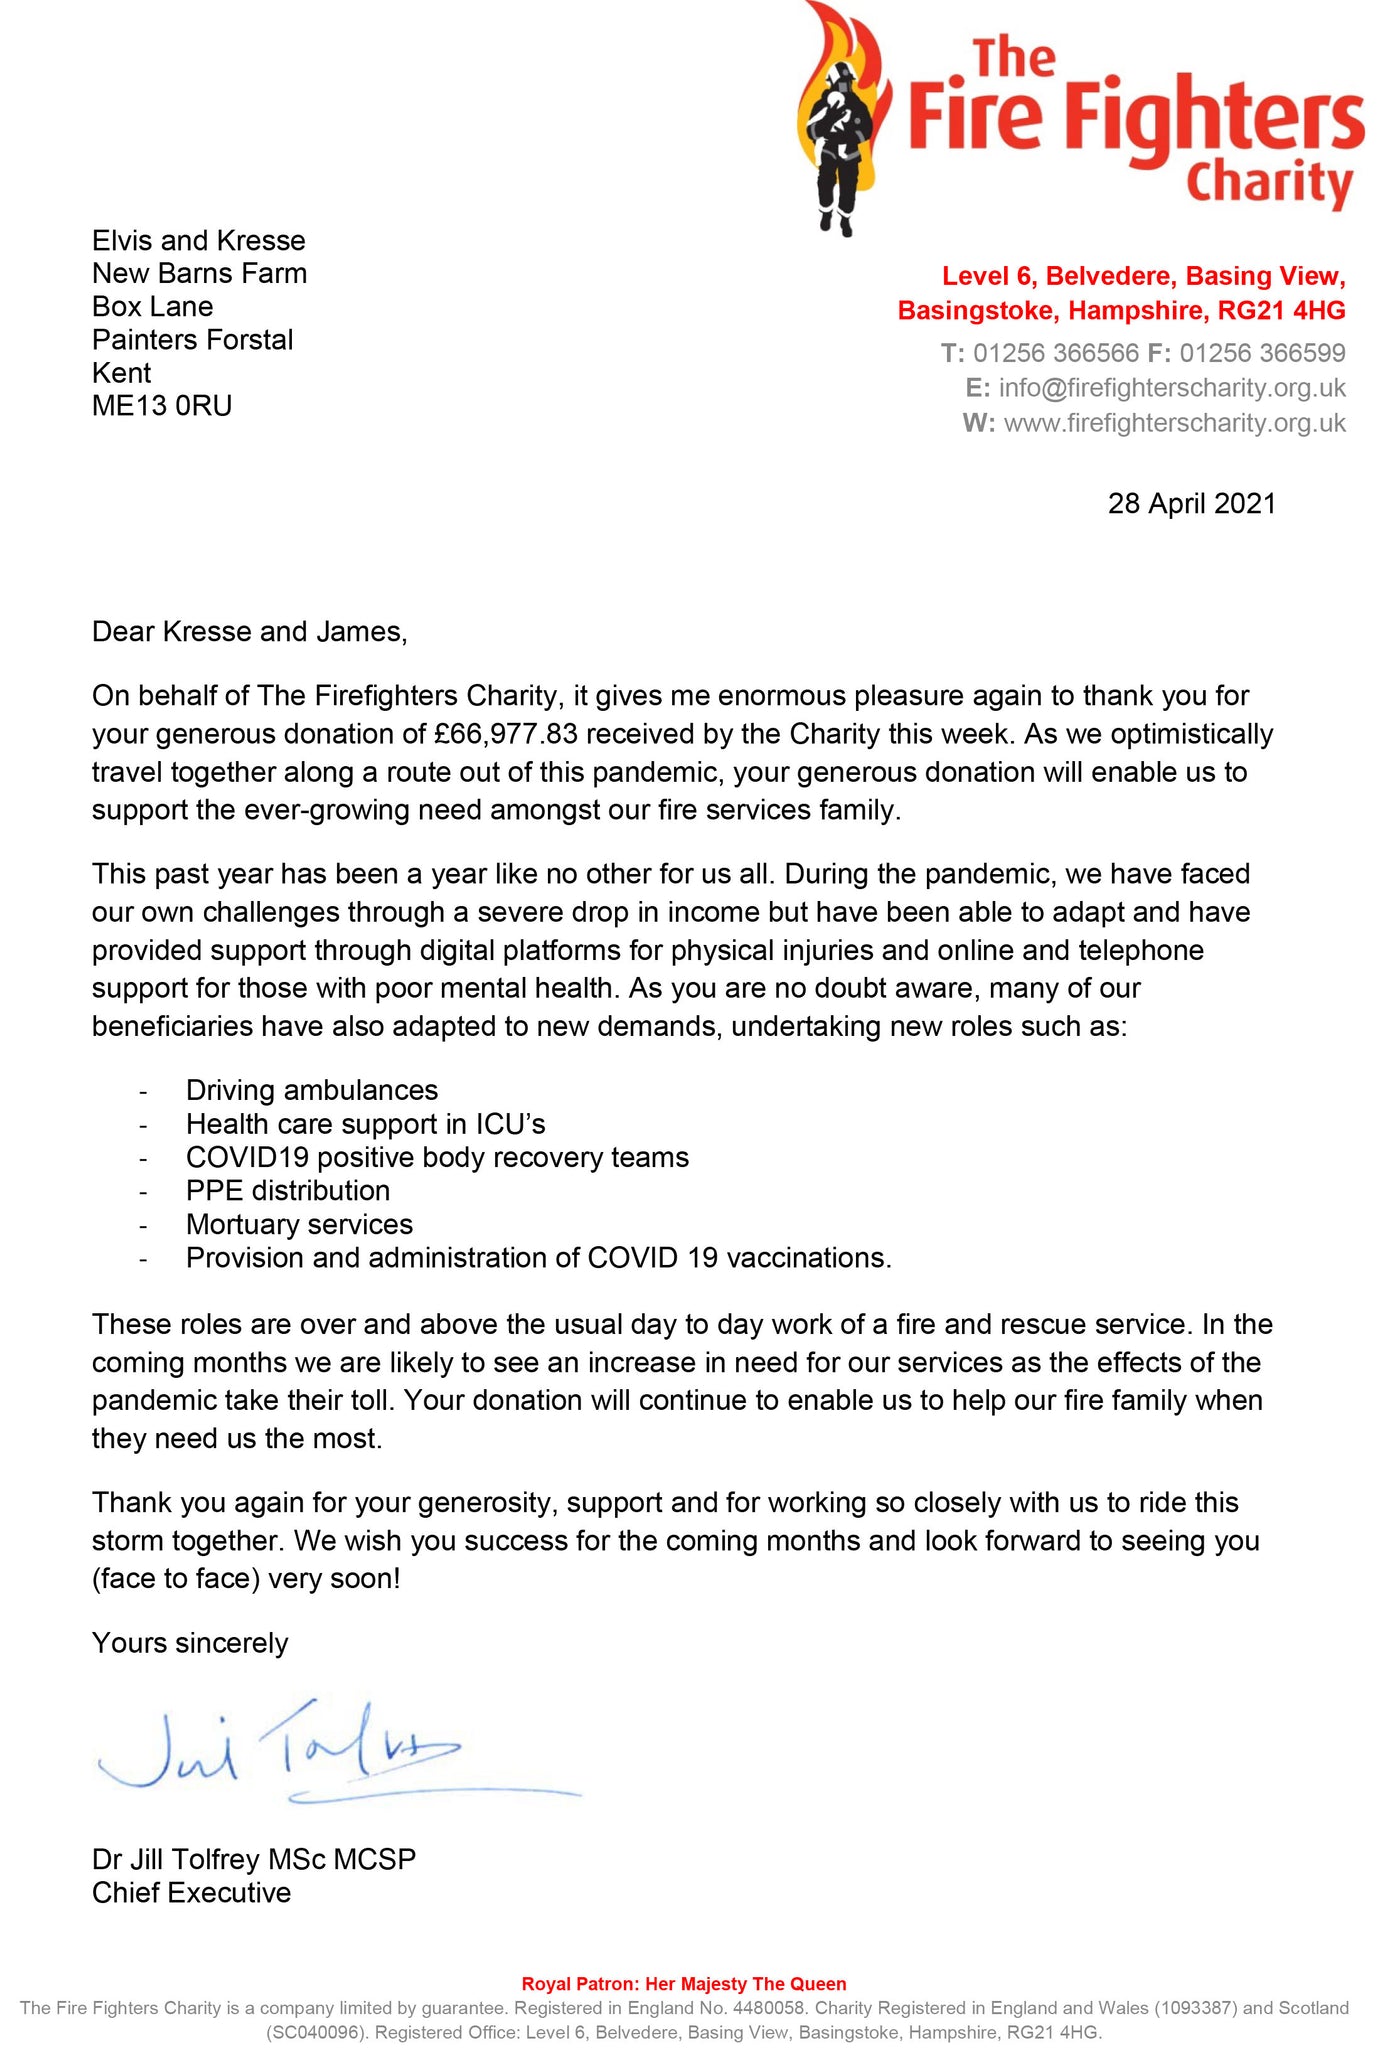 Letter from Fire Fighters Charity